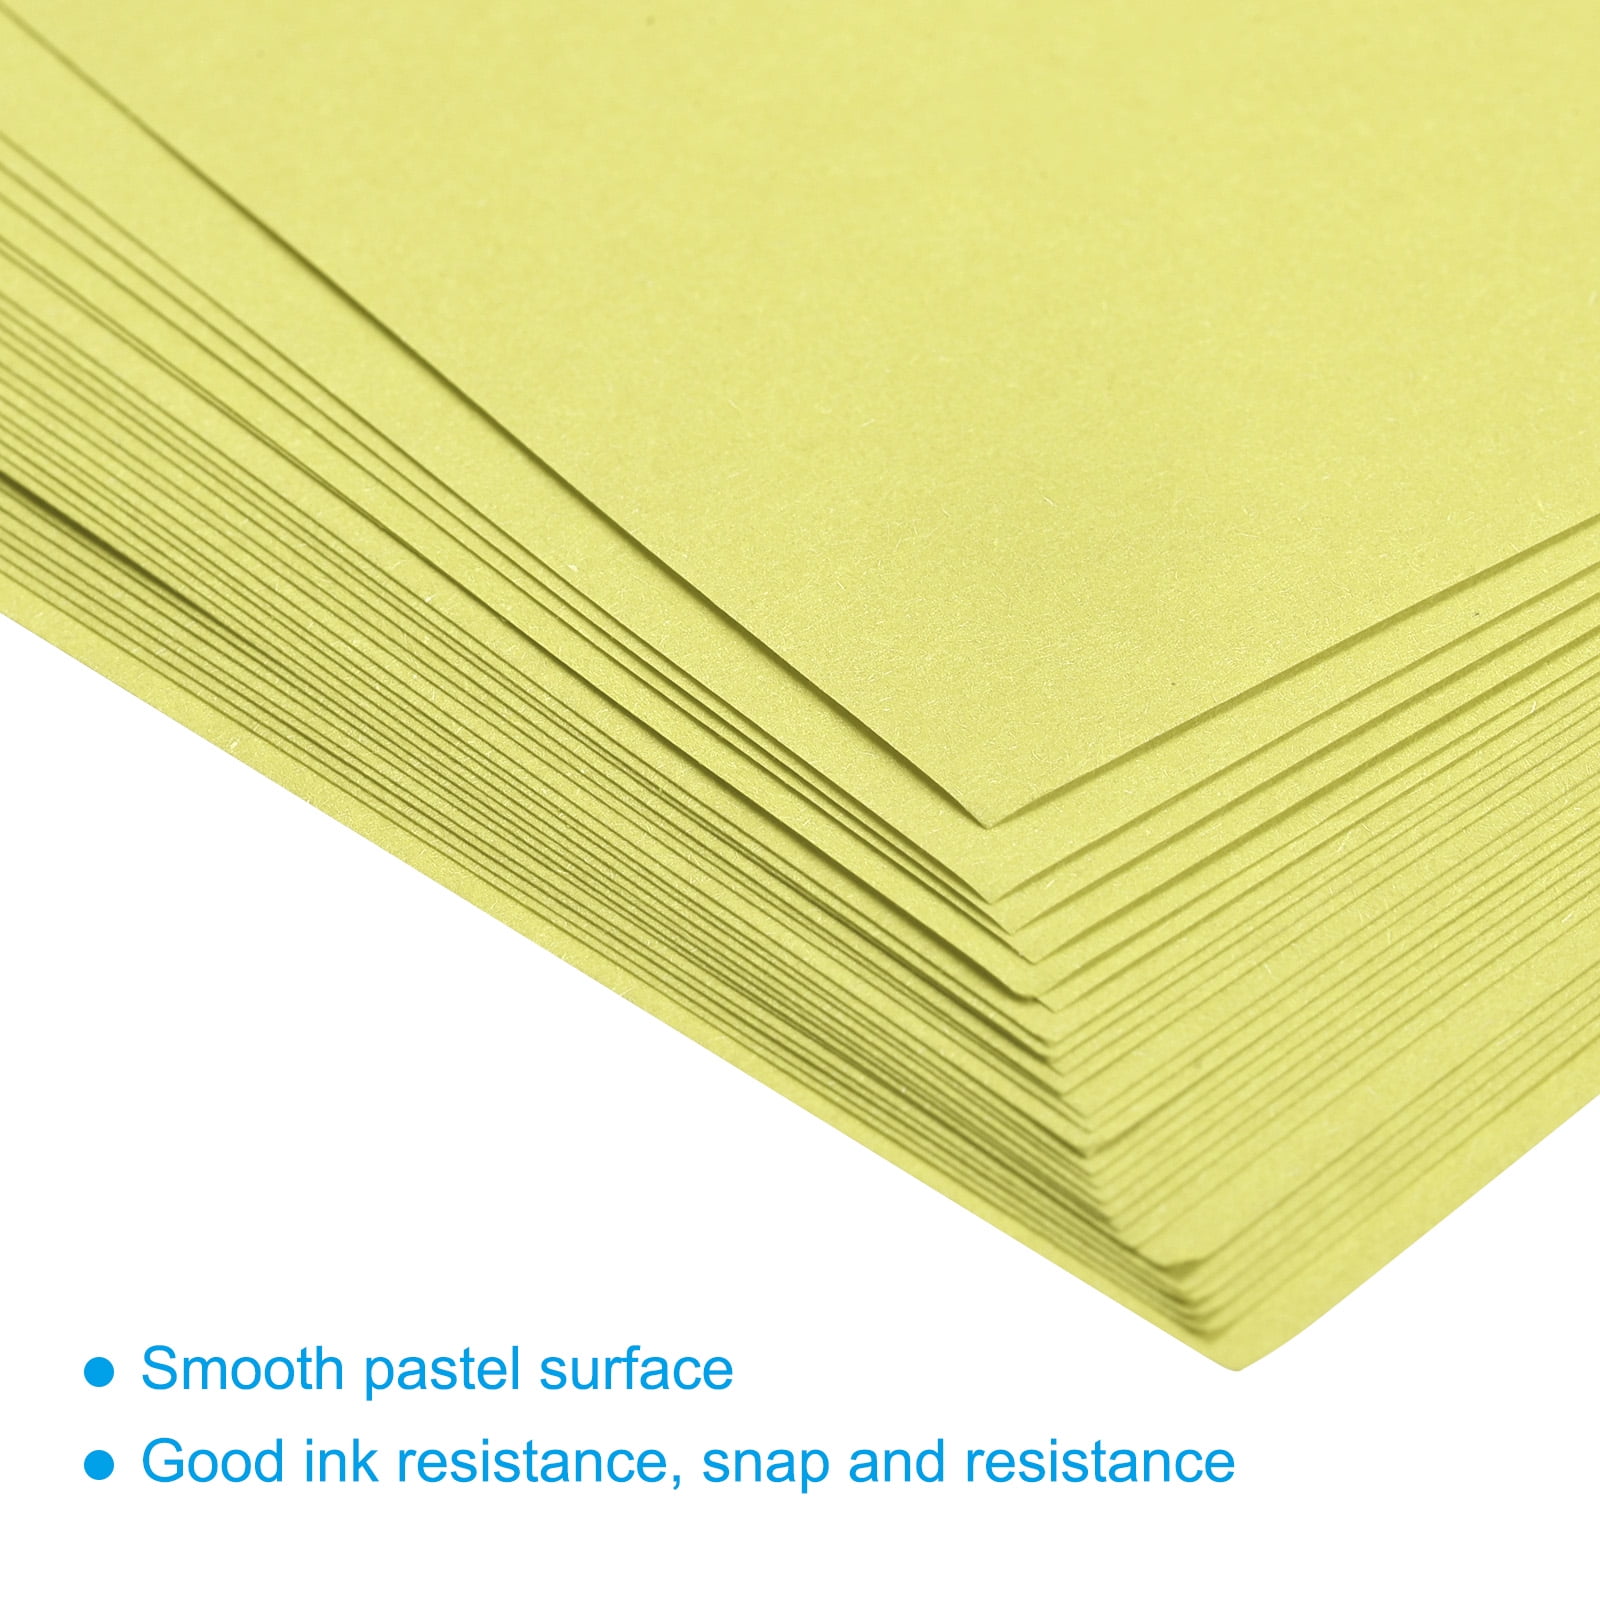  1InTheOffice Yellow Copy Paper, Yellow Colored Copy